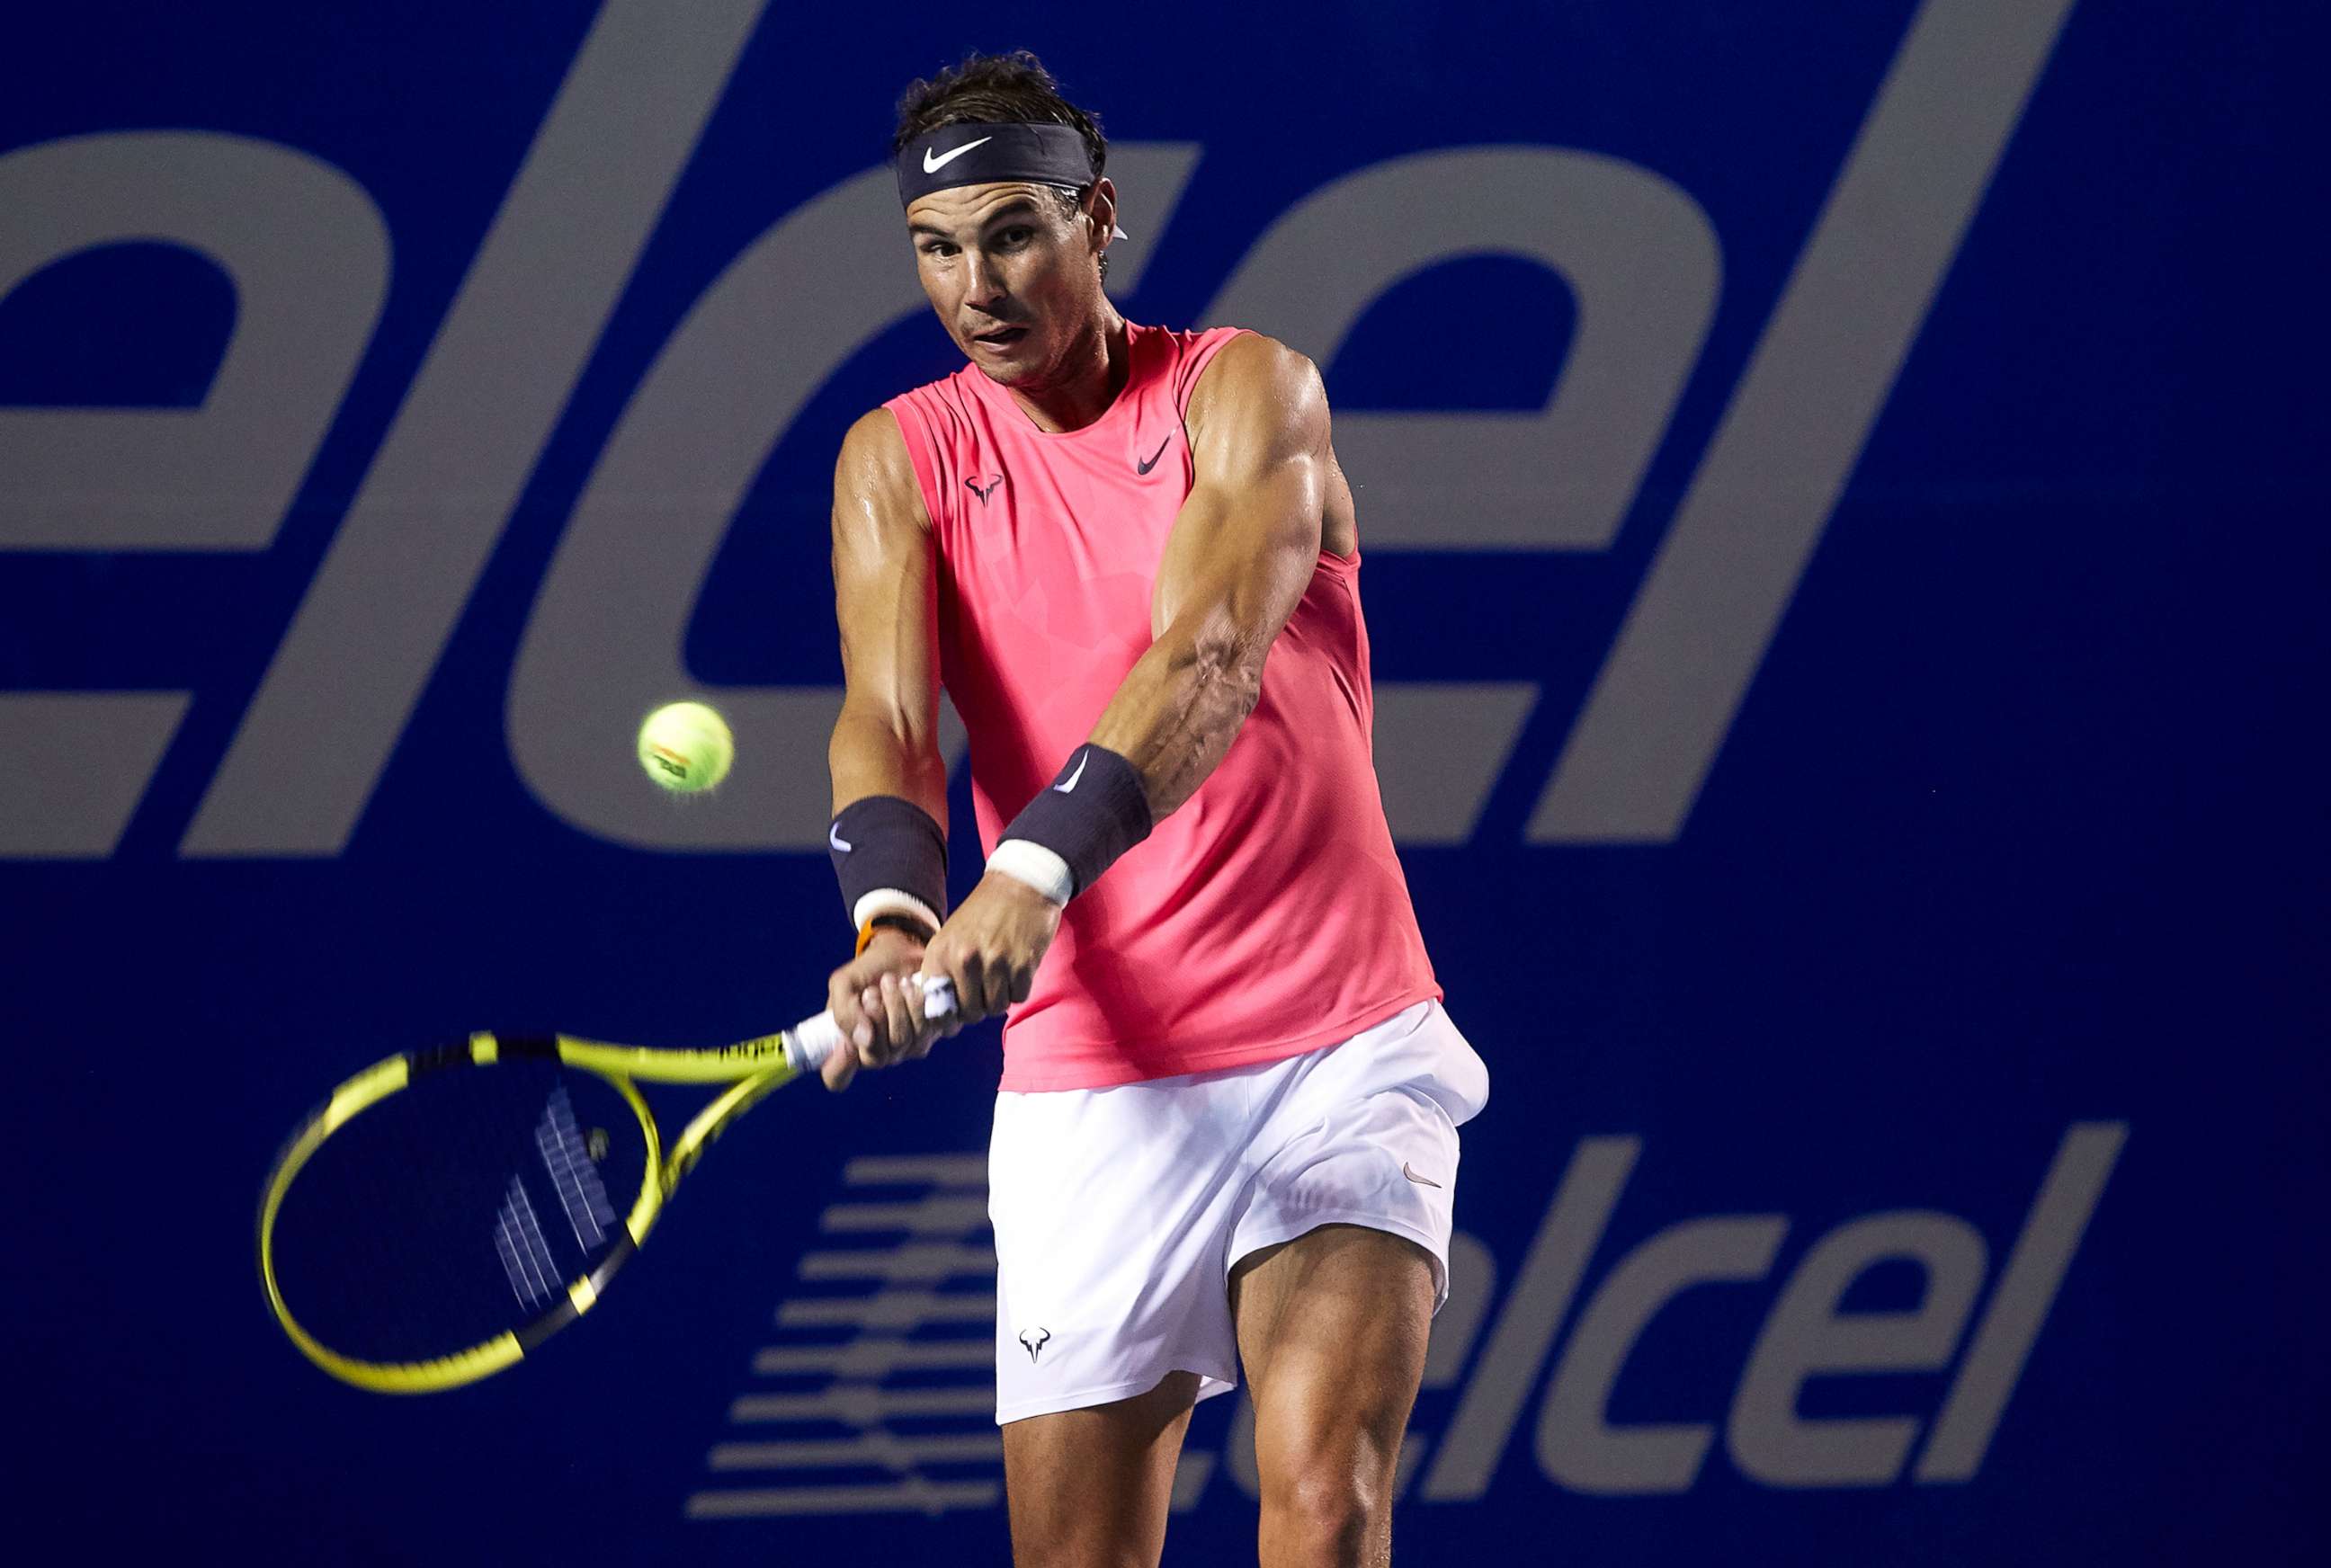 PHOTO: Rafael Nadal of Spain returns the ball in his Men's Singles Final match against Taylor Fritz of United States during the ATP Mexican Open 2020, on February 29, 2020, in Acapulco, Mexico.